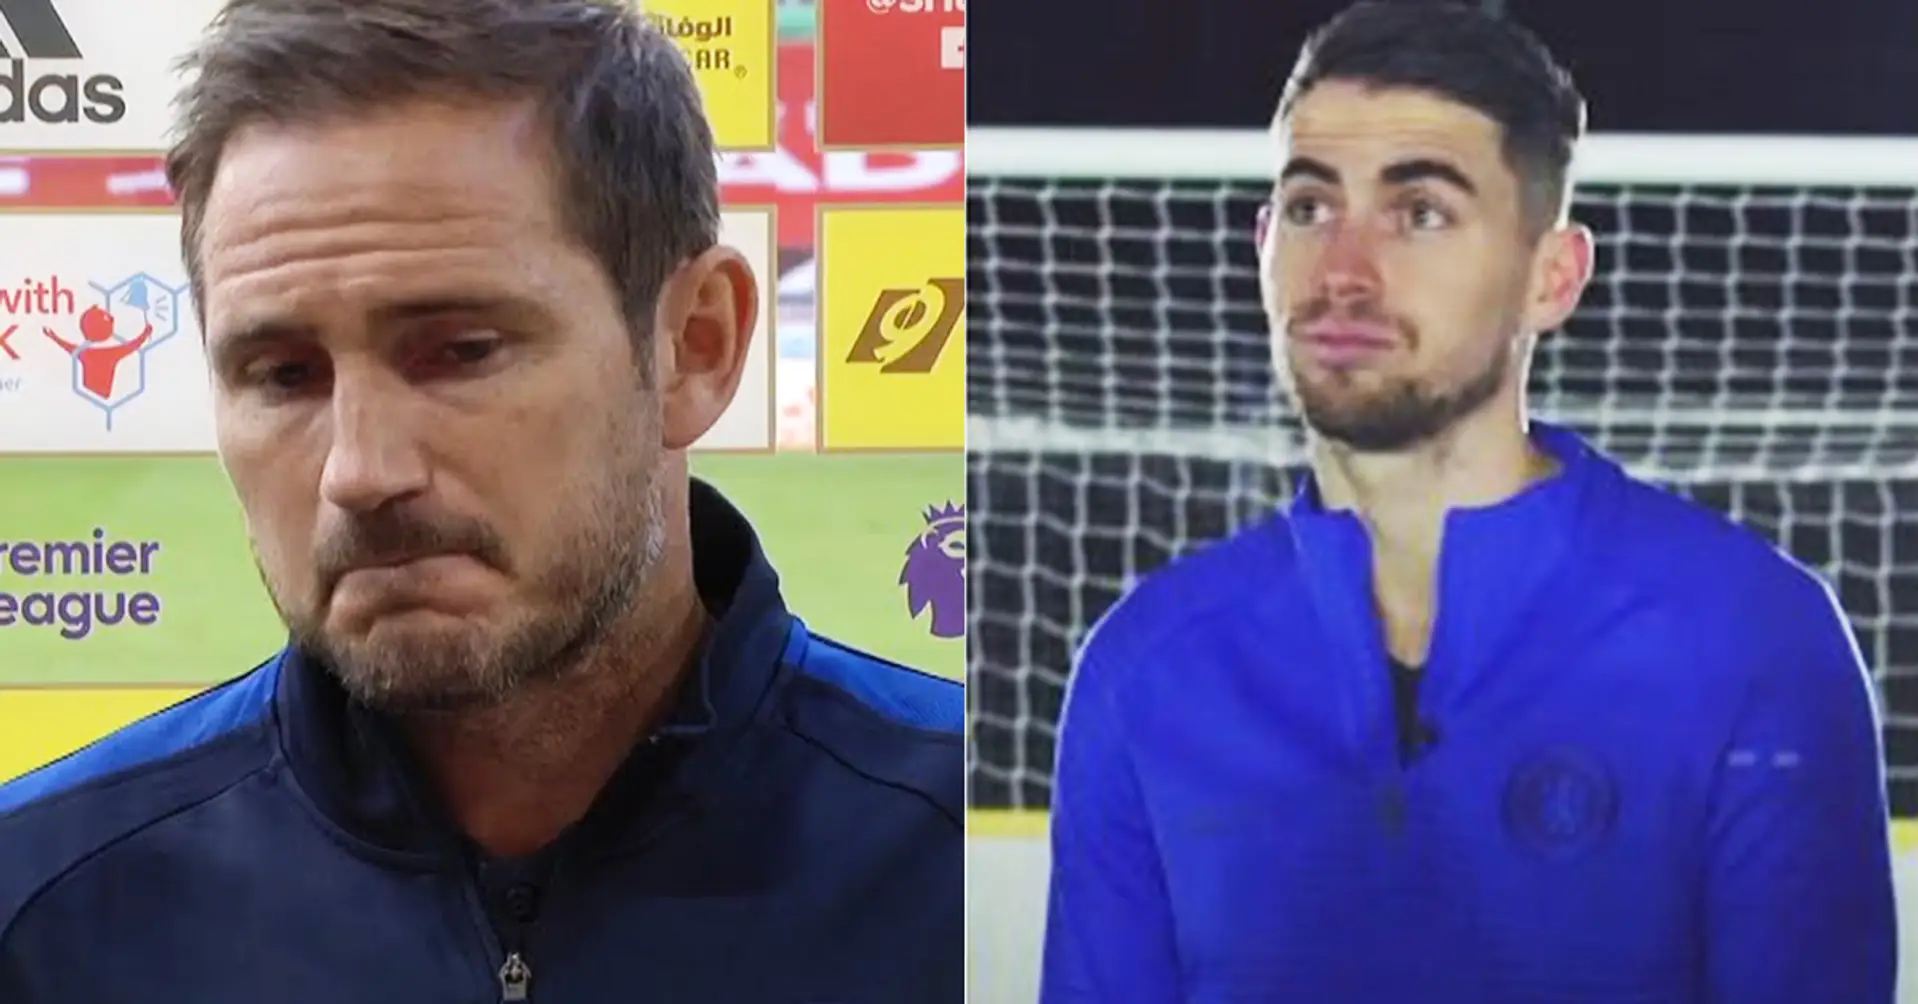 'I'll be sincere. He wasn't ready'. Jorginho suprises fans with honest interview about Frank Lampard